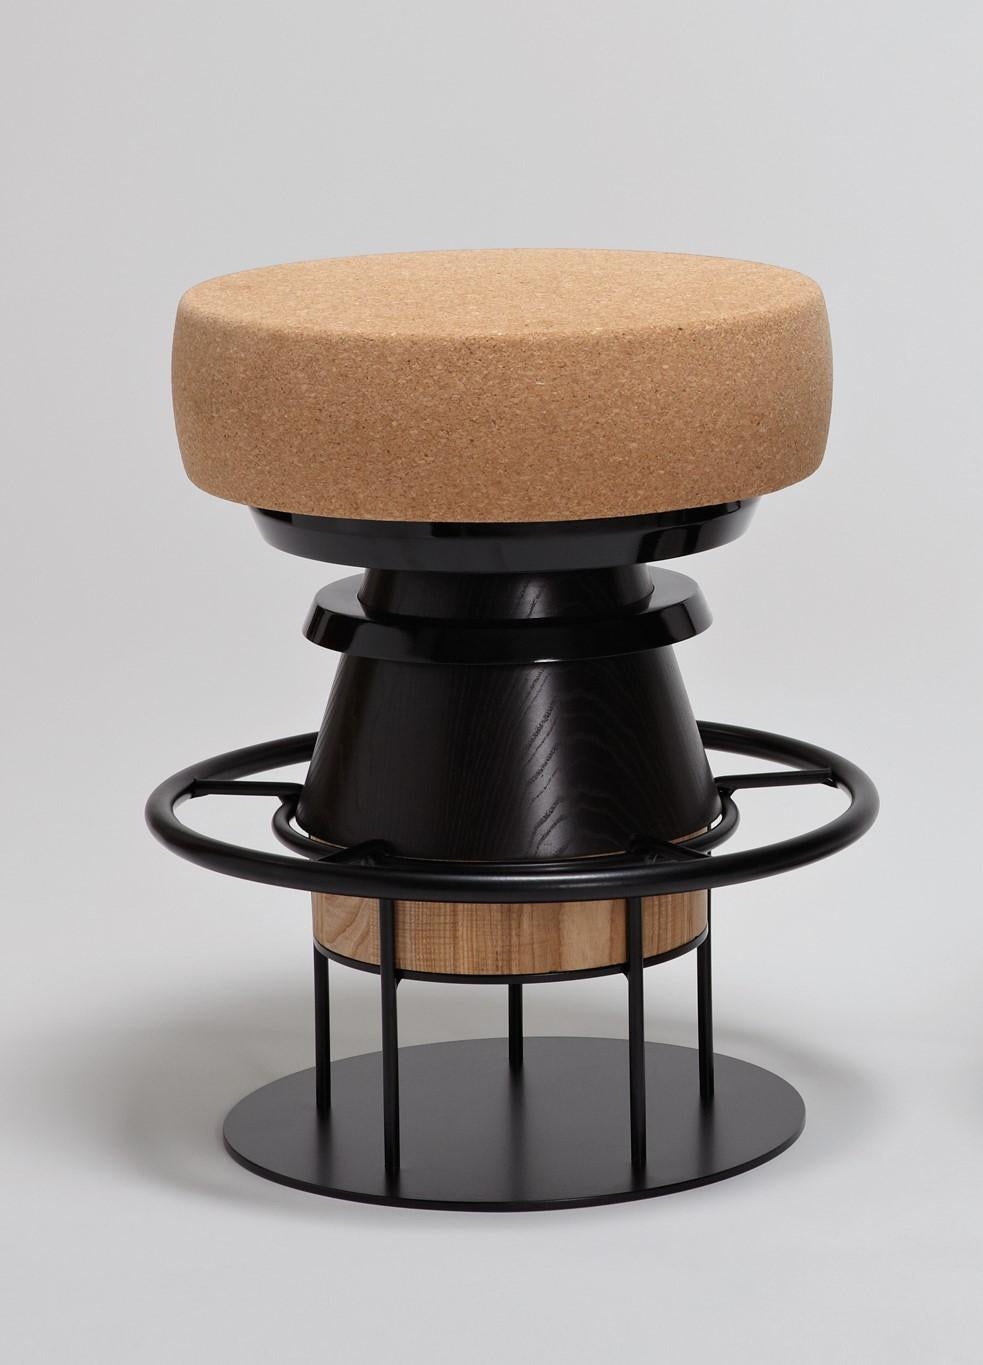 Low black tembo stool, note design studio.
Dimensions: D 36 x H 46 cm.
Materials: Lacquered steel structure, solid wood (beech) and lacquered MDF, natural cork base.
Available in colorful version and in 3 sizes: H46, H64, H76 cm.

Tembo is a